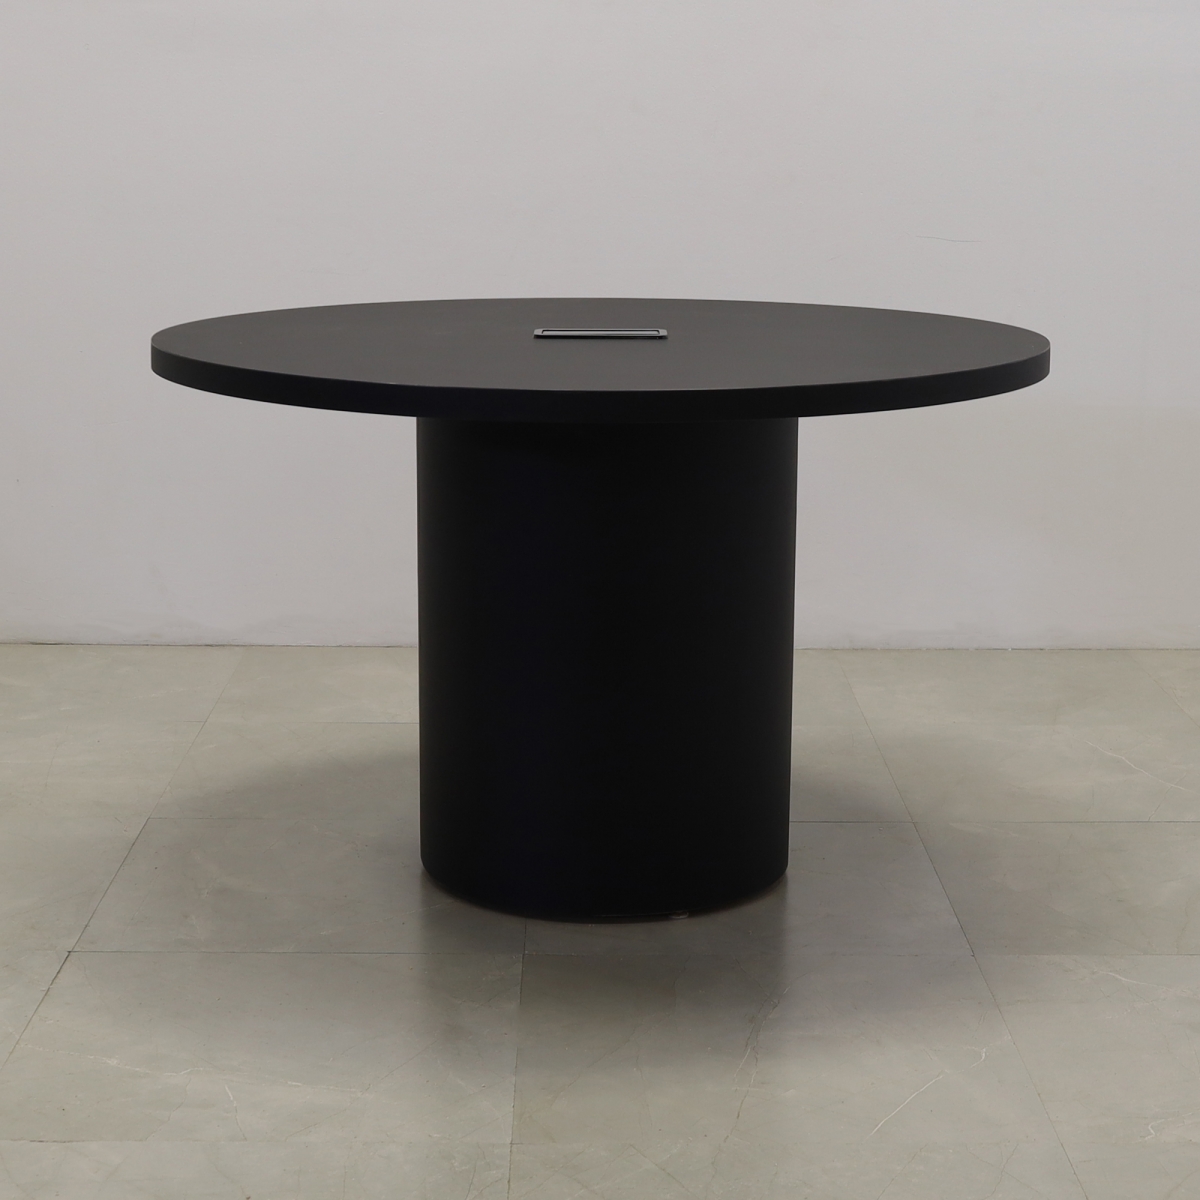 Newton Round Conference Table With Laminate Top